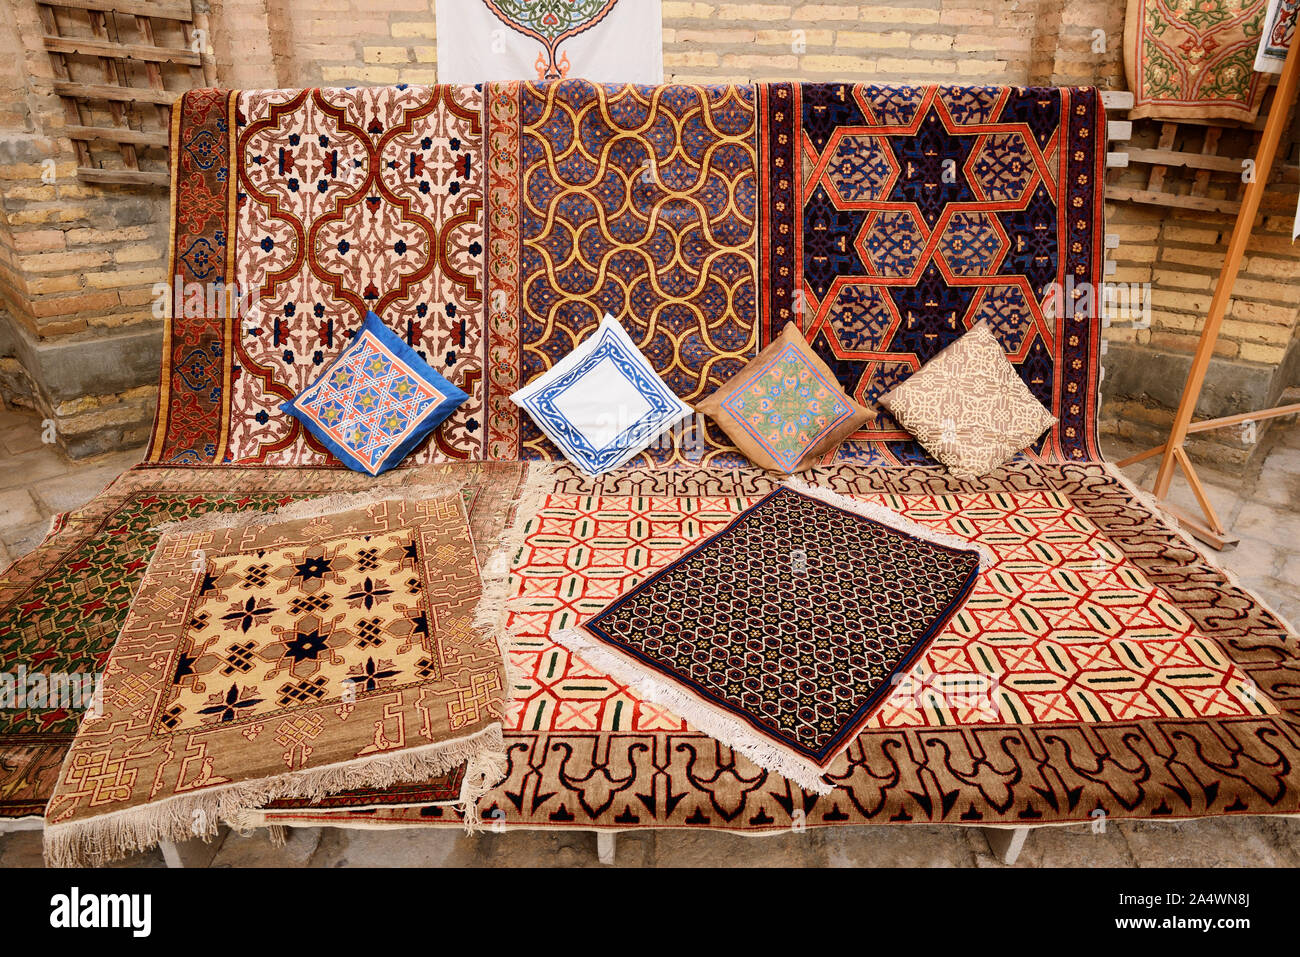 Rugs or carpets made of silk and cotton, a traditional art of embroidery. Suzanni (Suzani) Centre, Khiva. Uzbekistan Stock Photo